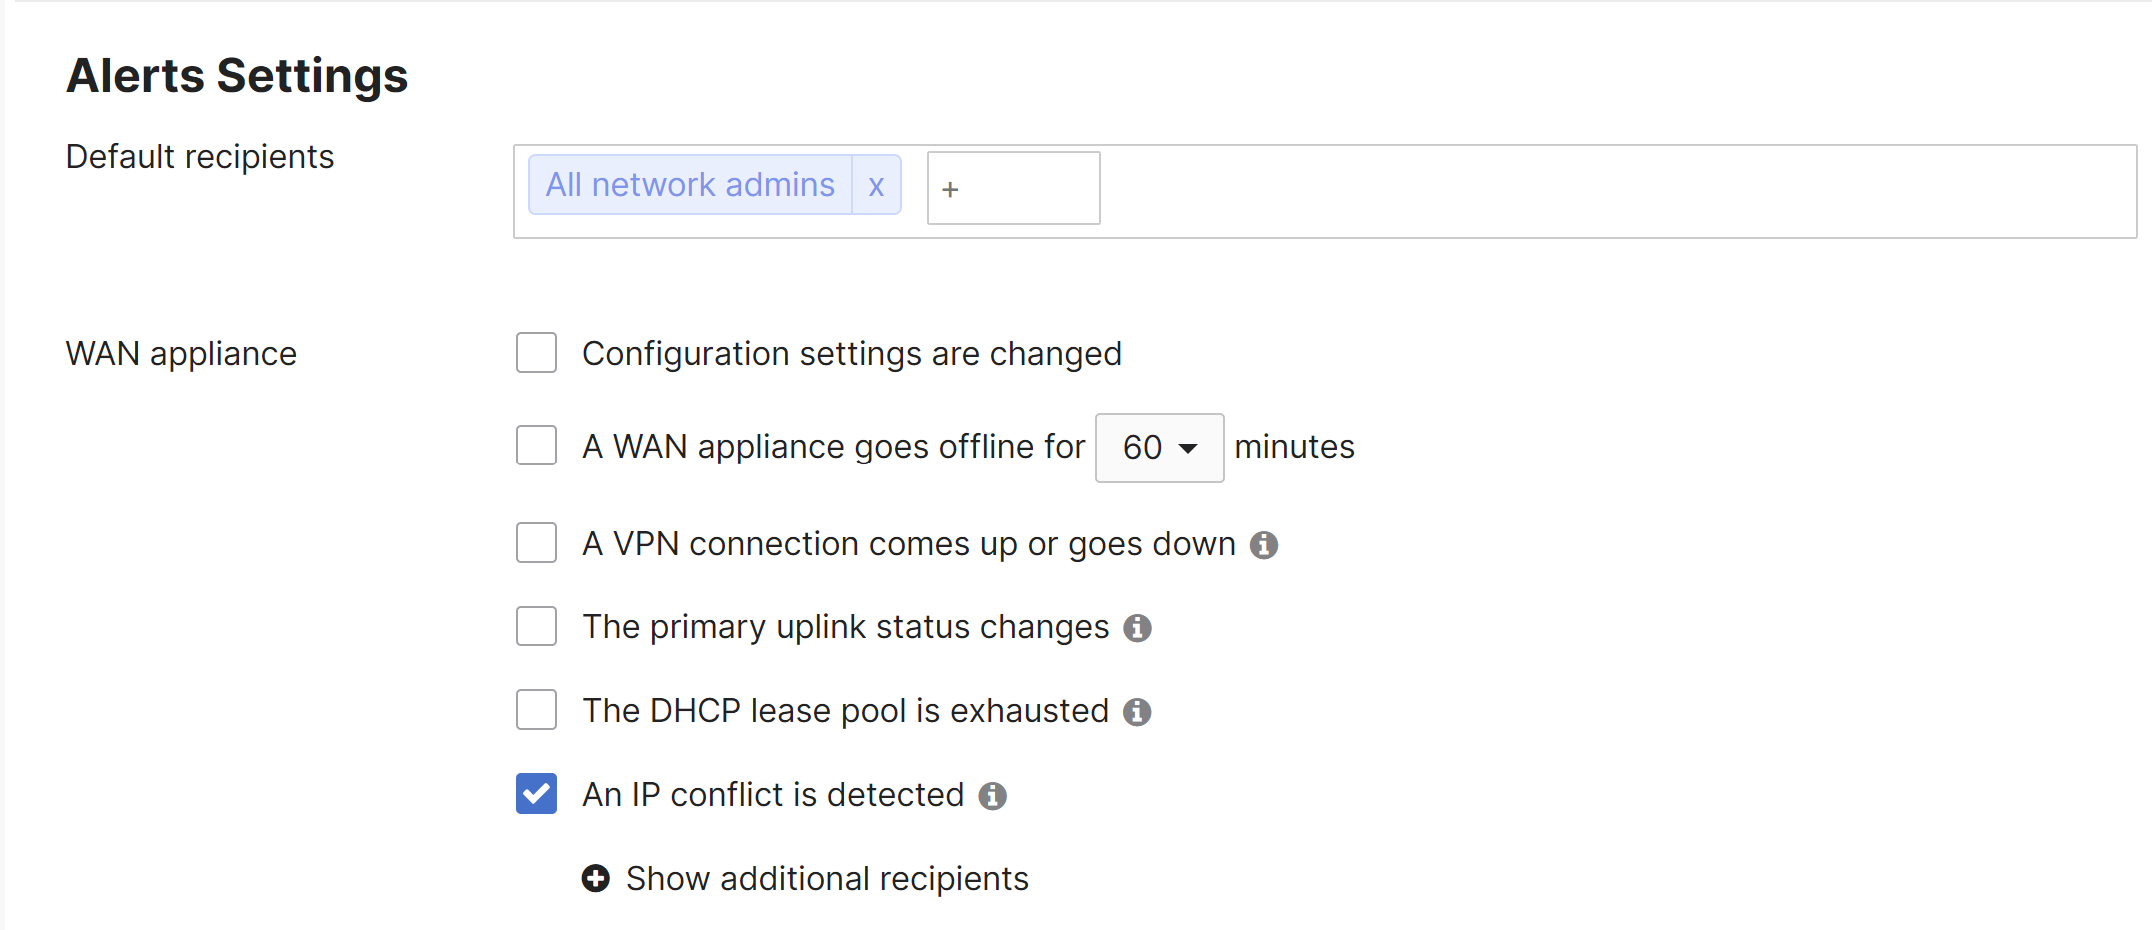 Network-wide Alerts for WAN appliance IP conflict detected